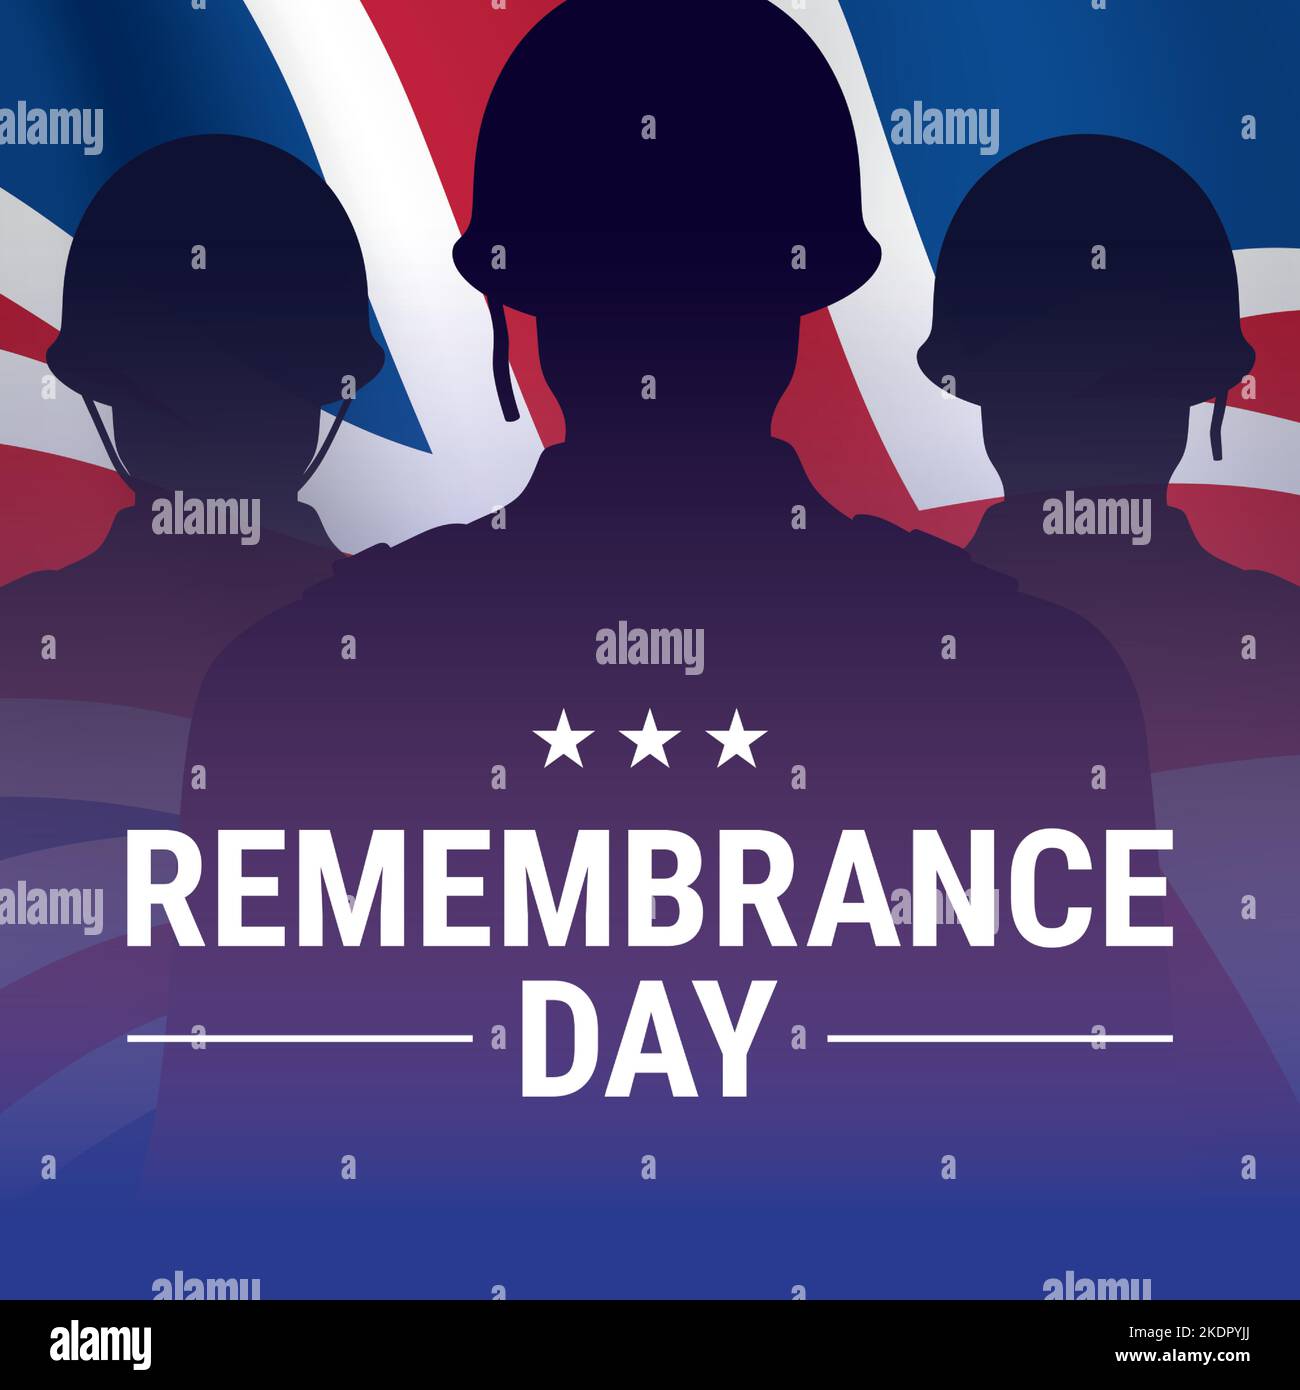 Remembrance day vector card design, with vintage style soldier silhouettes on waving UK flag background. Patriotic British army banner with memorial message. Stock Vector